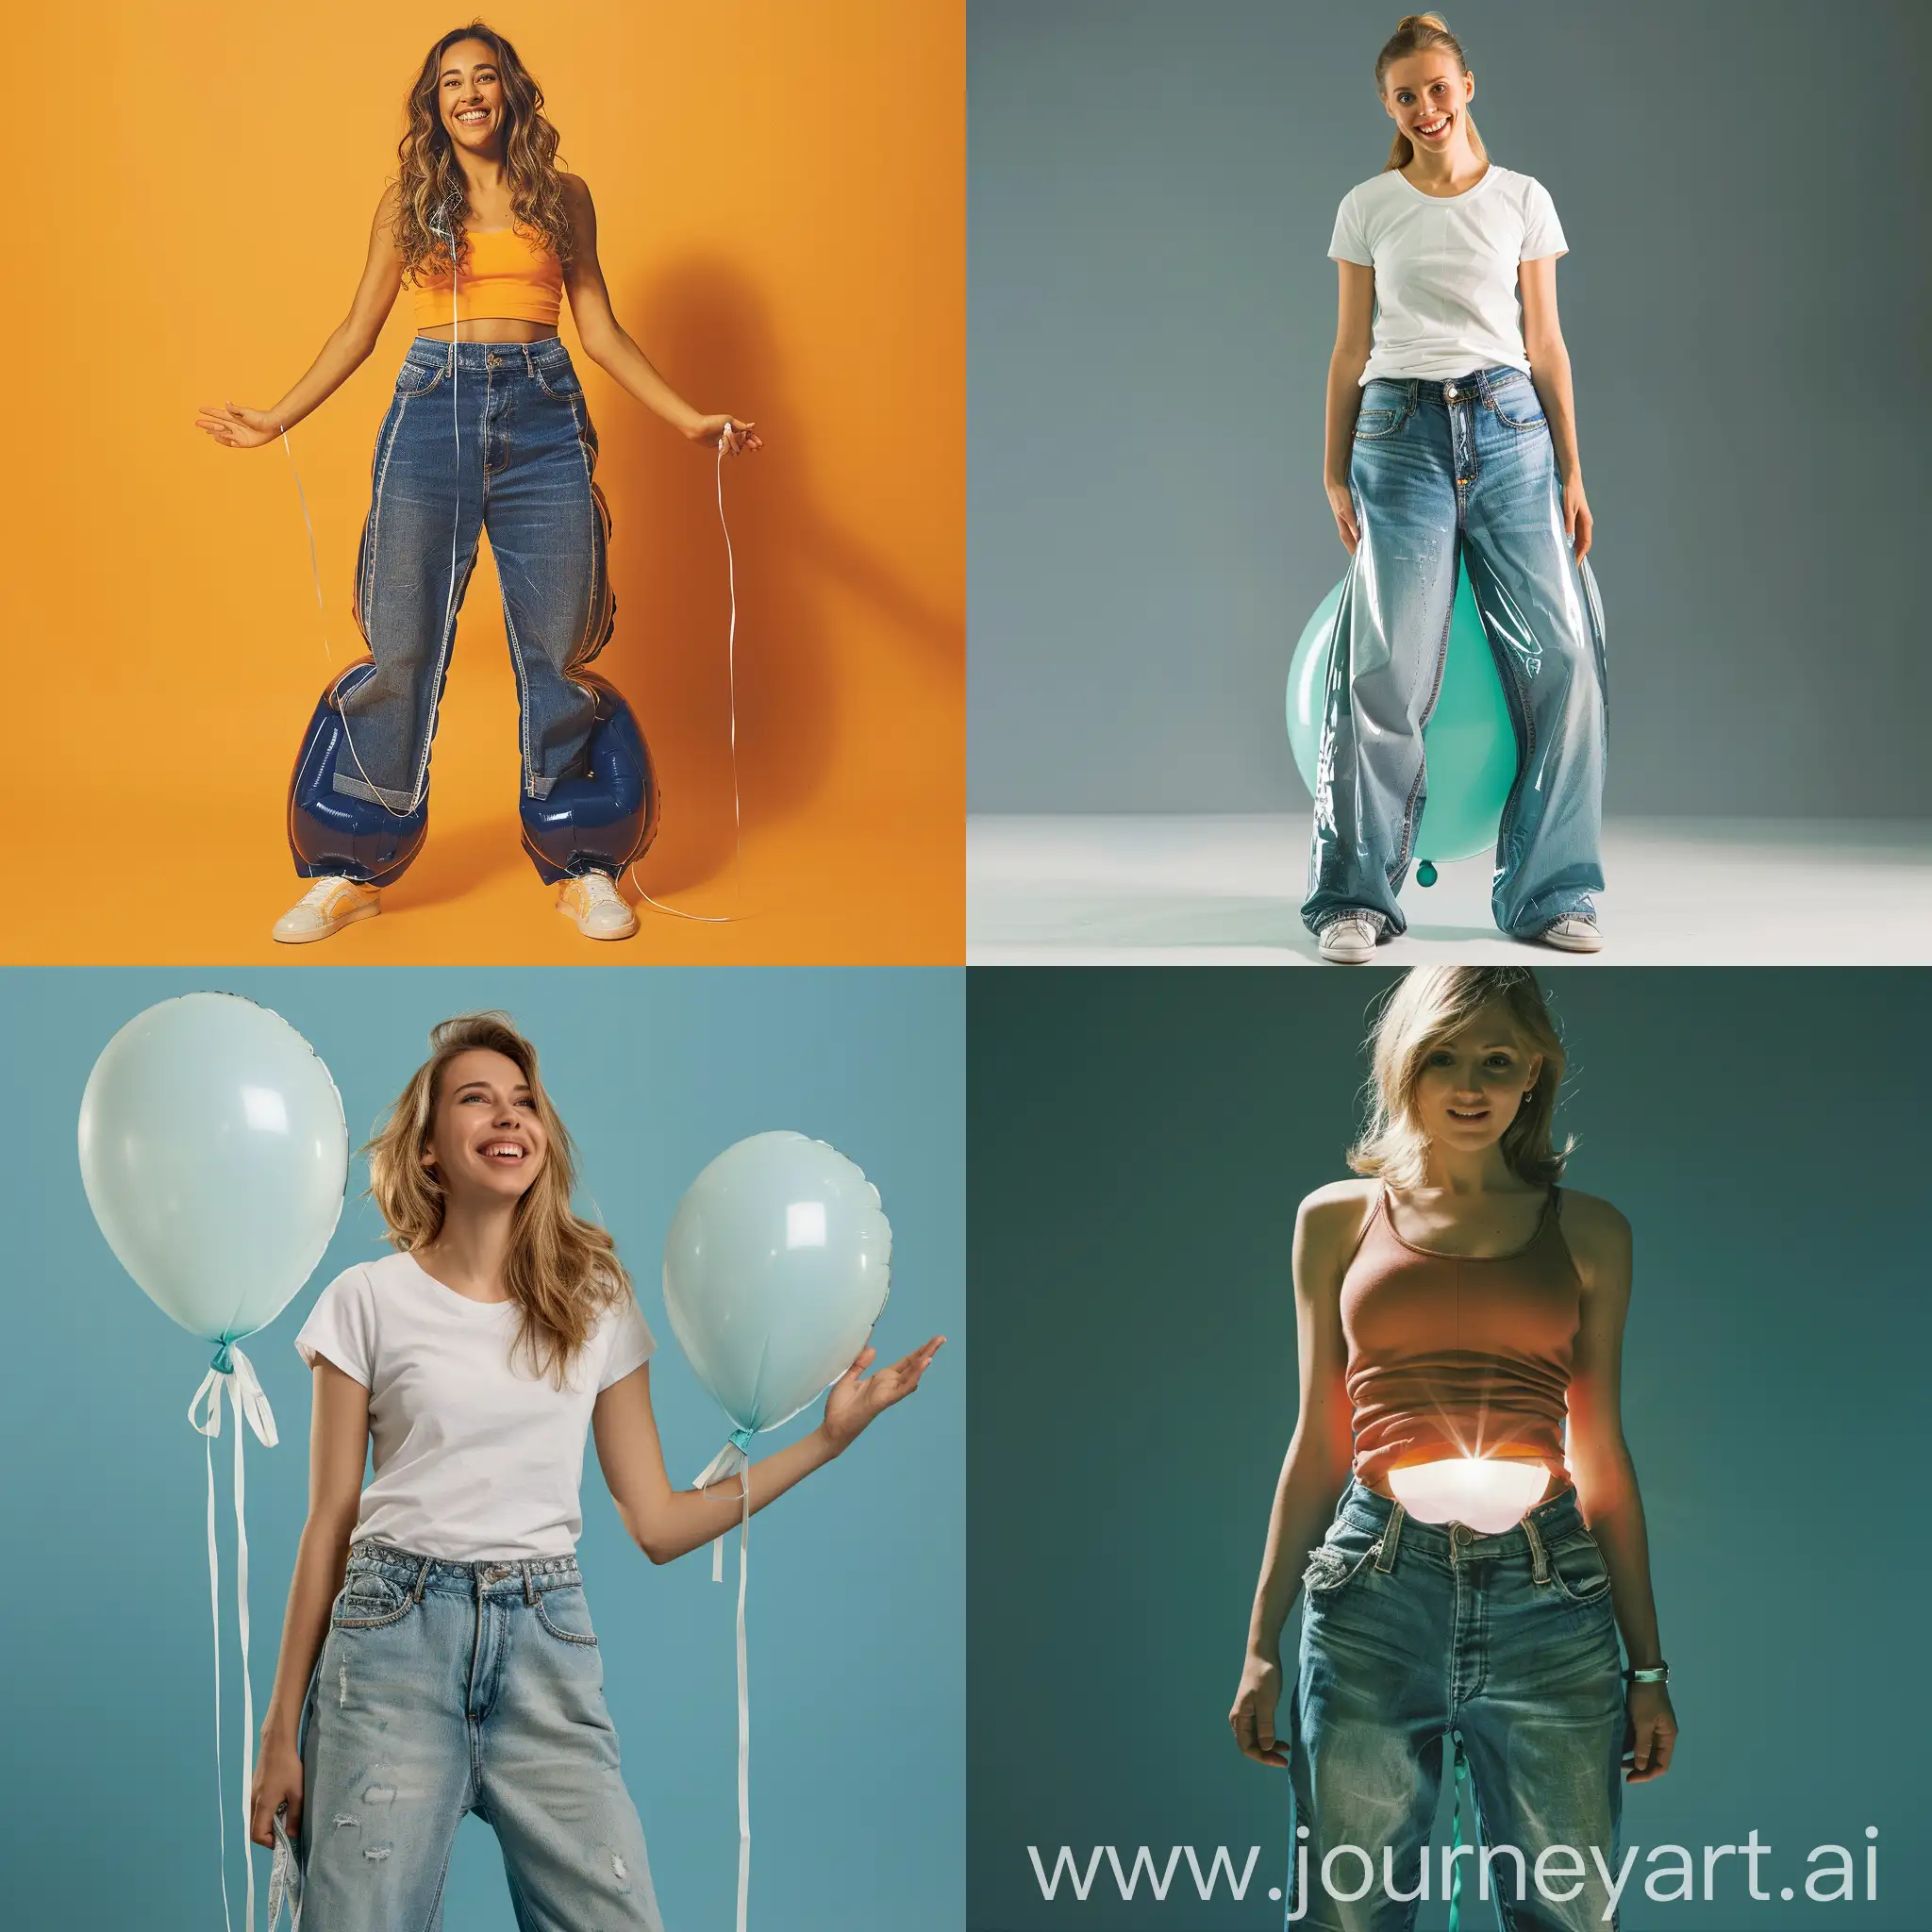 Playful-Woman-Inflating-Jeans-Like-Balloon